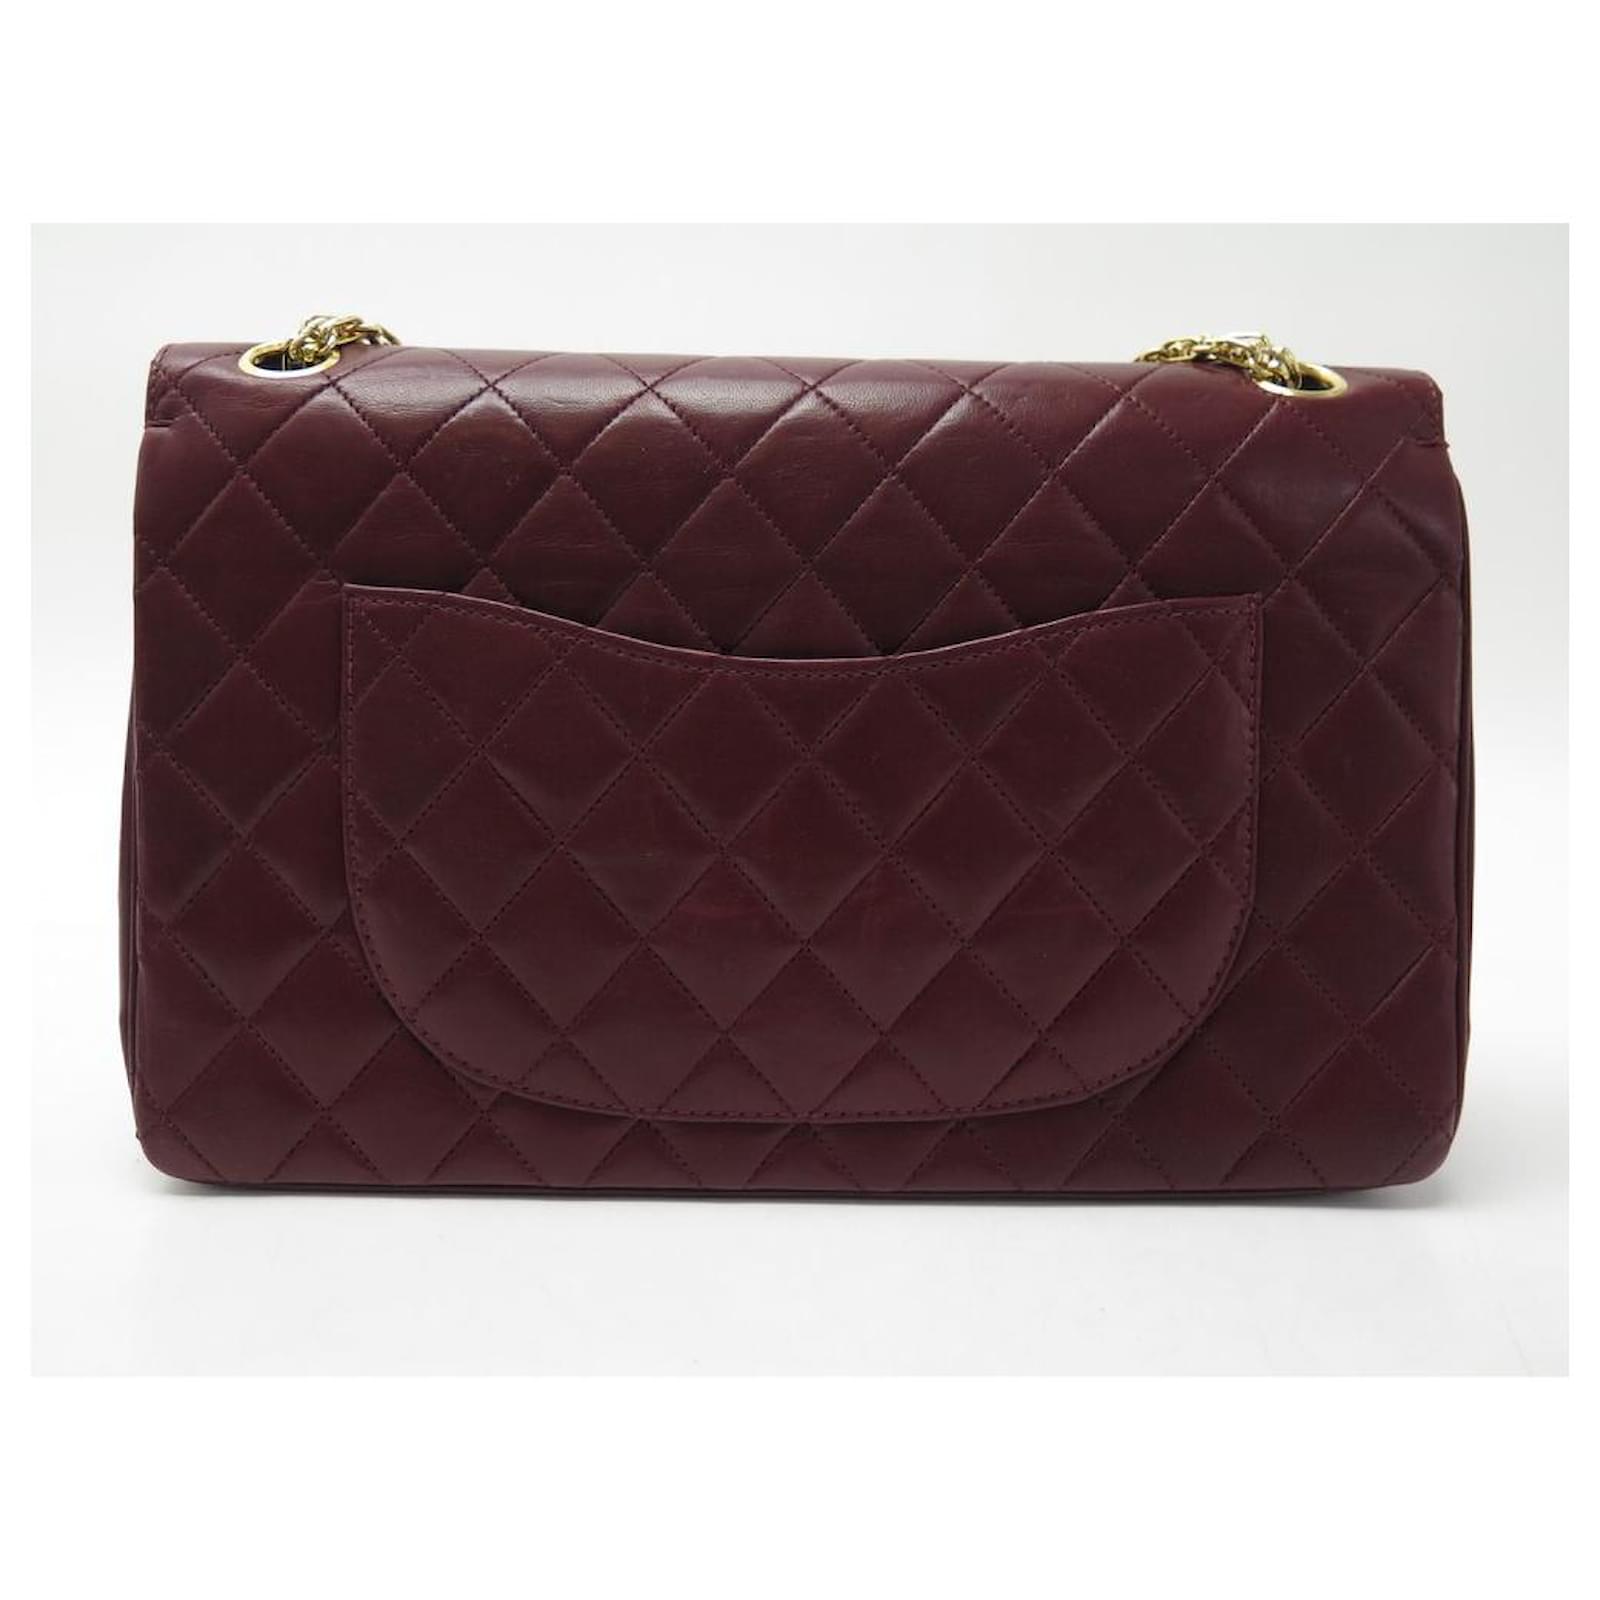 Timeless classique top handle leather handbag Chanel Burgundy in Leather -  24822469